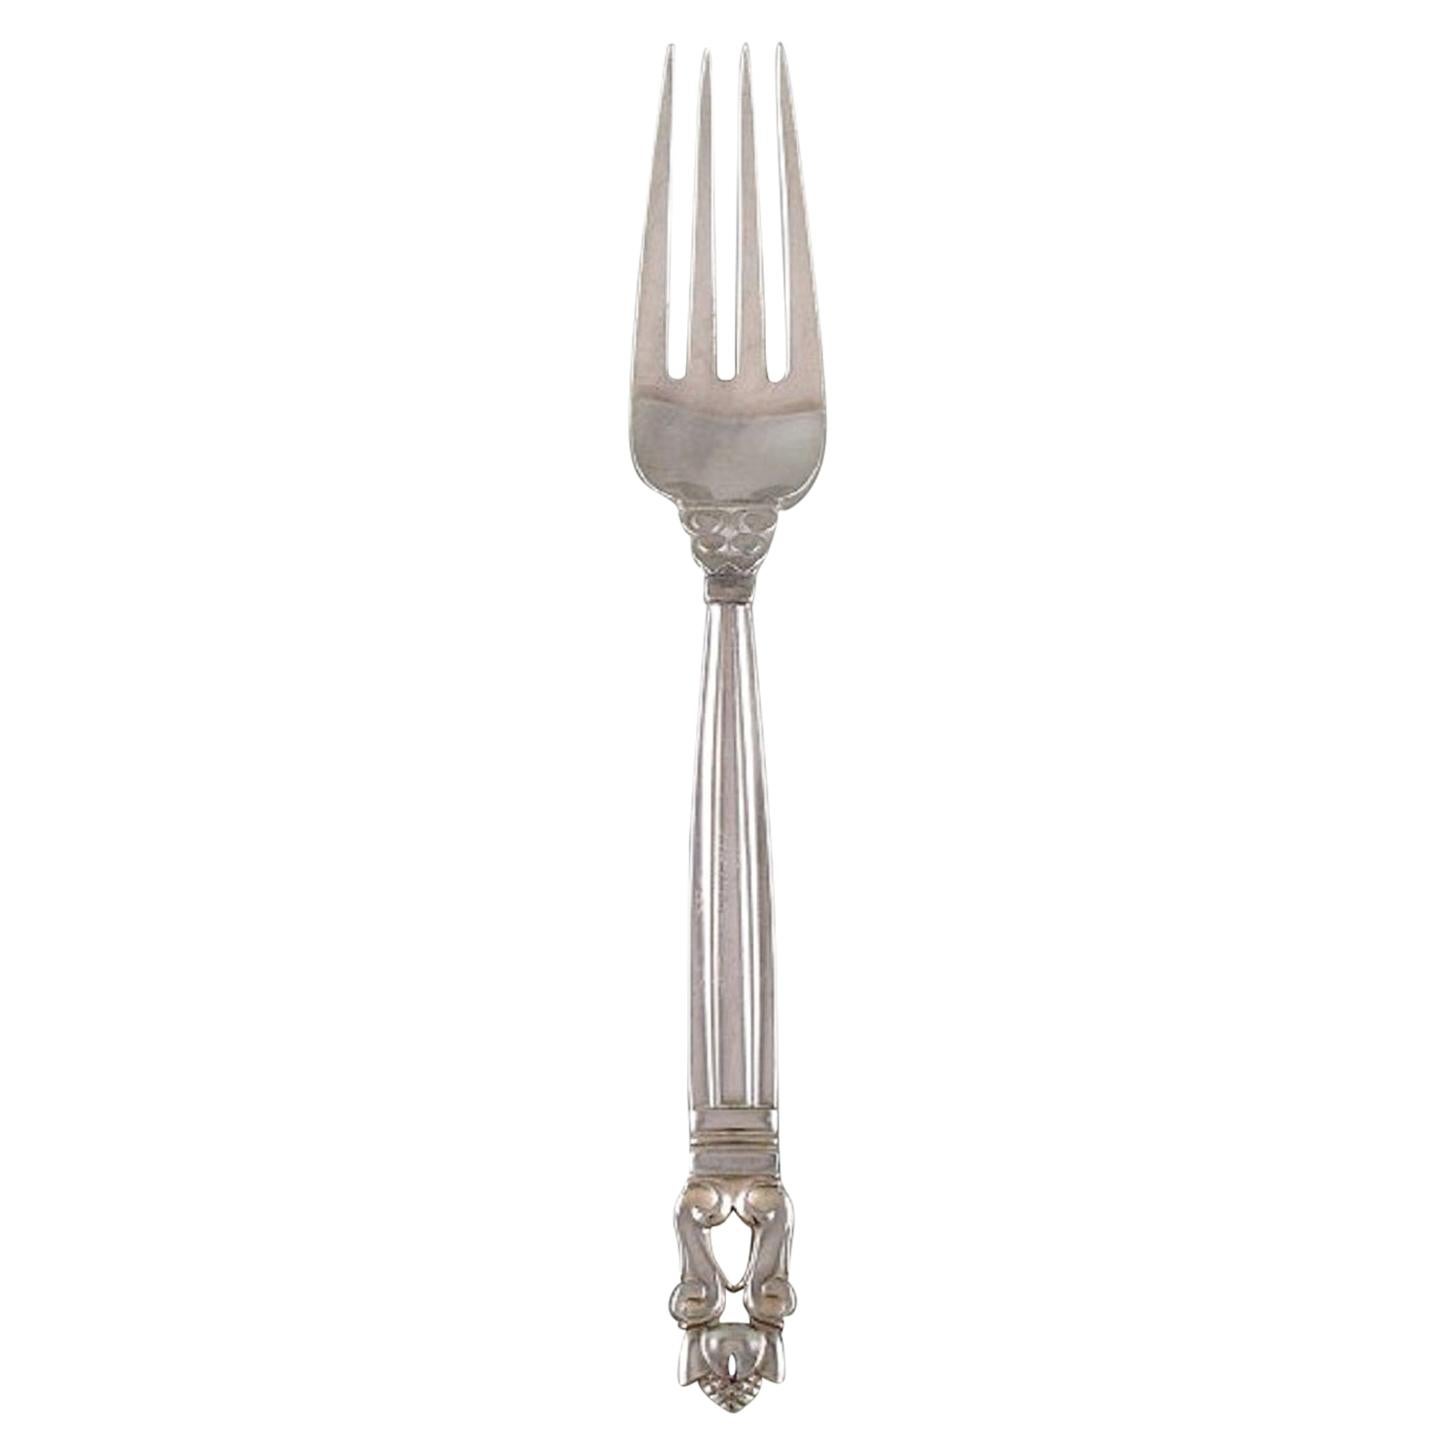 Georg Jensen "Acorn" Lunch Fork in Sterling Silver, Dated 1933-1944 Three Pieces